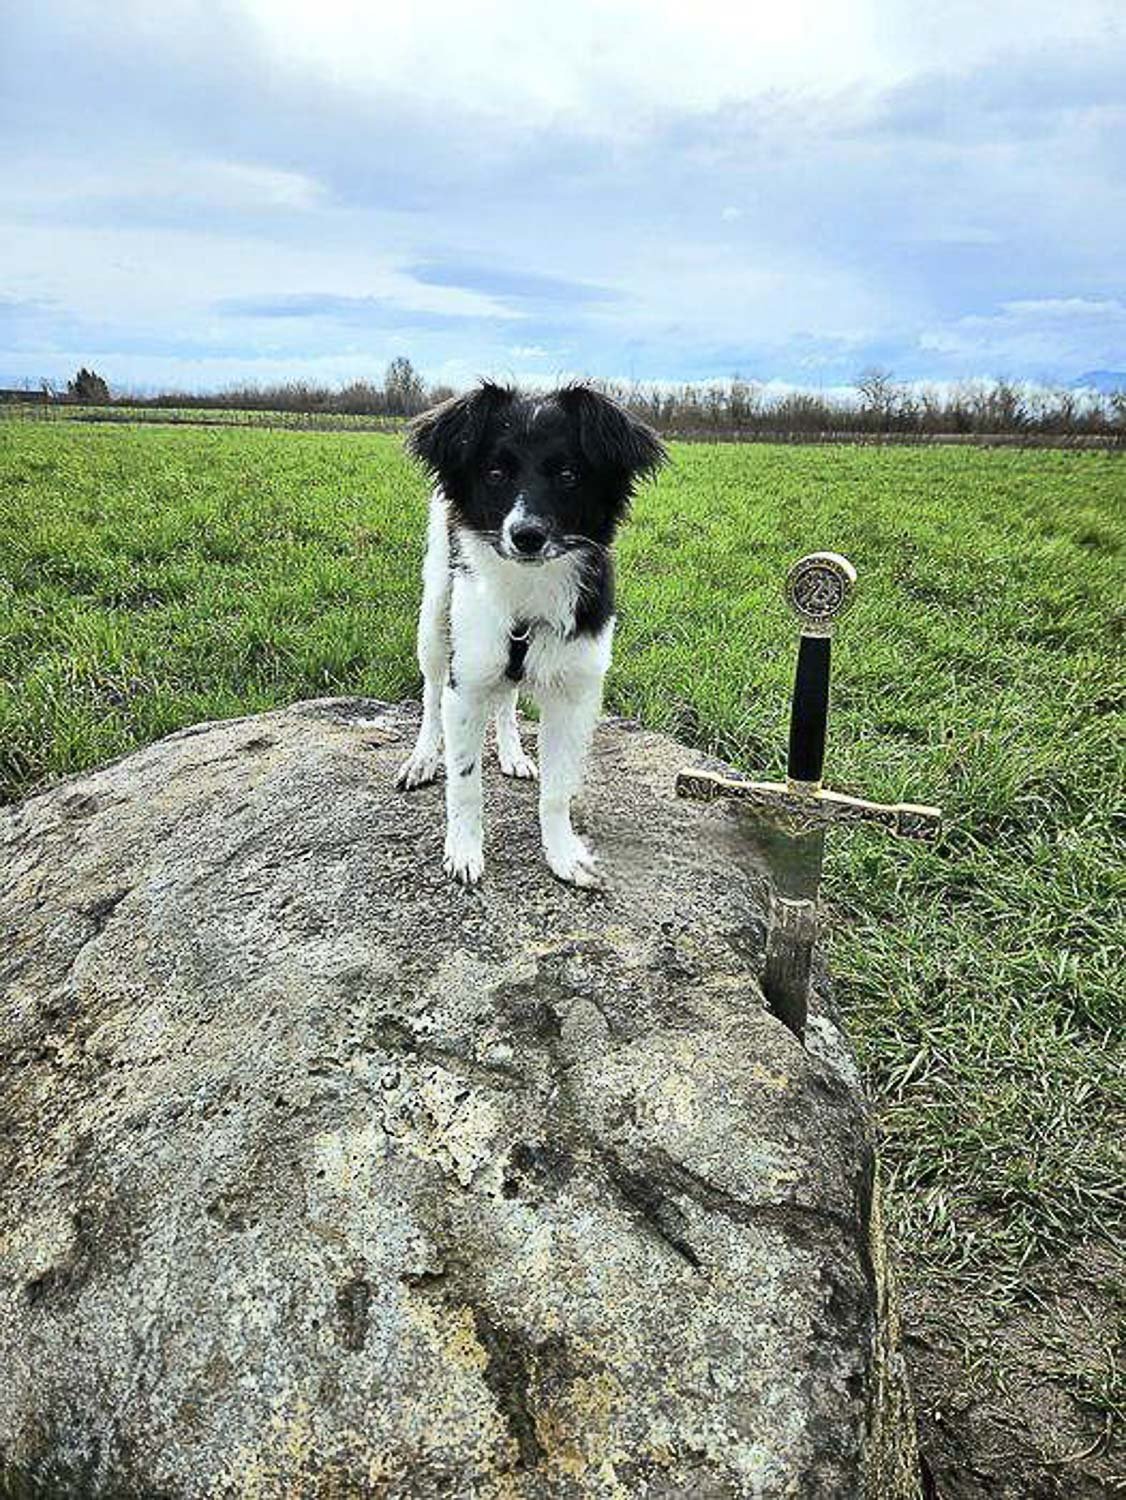 A small black and white colored dog standing in a field on a rock with a sword plunged into it